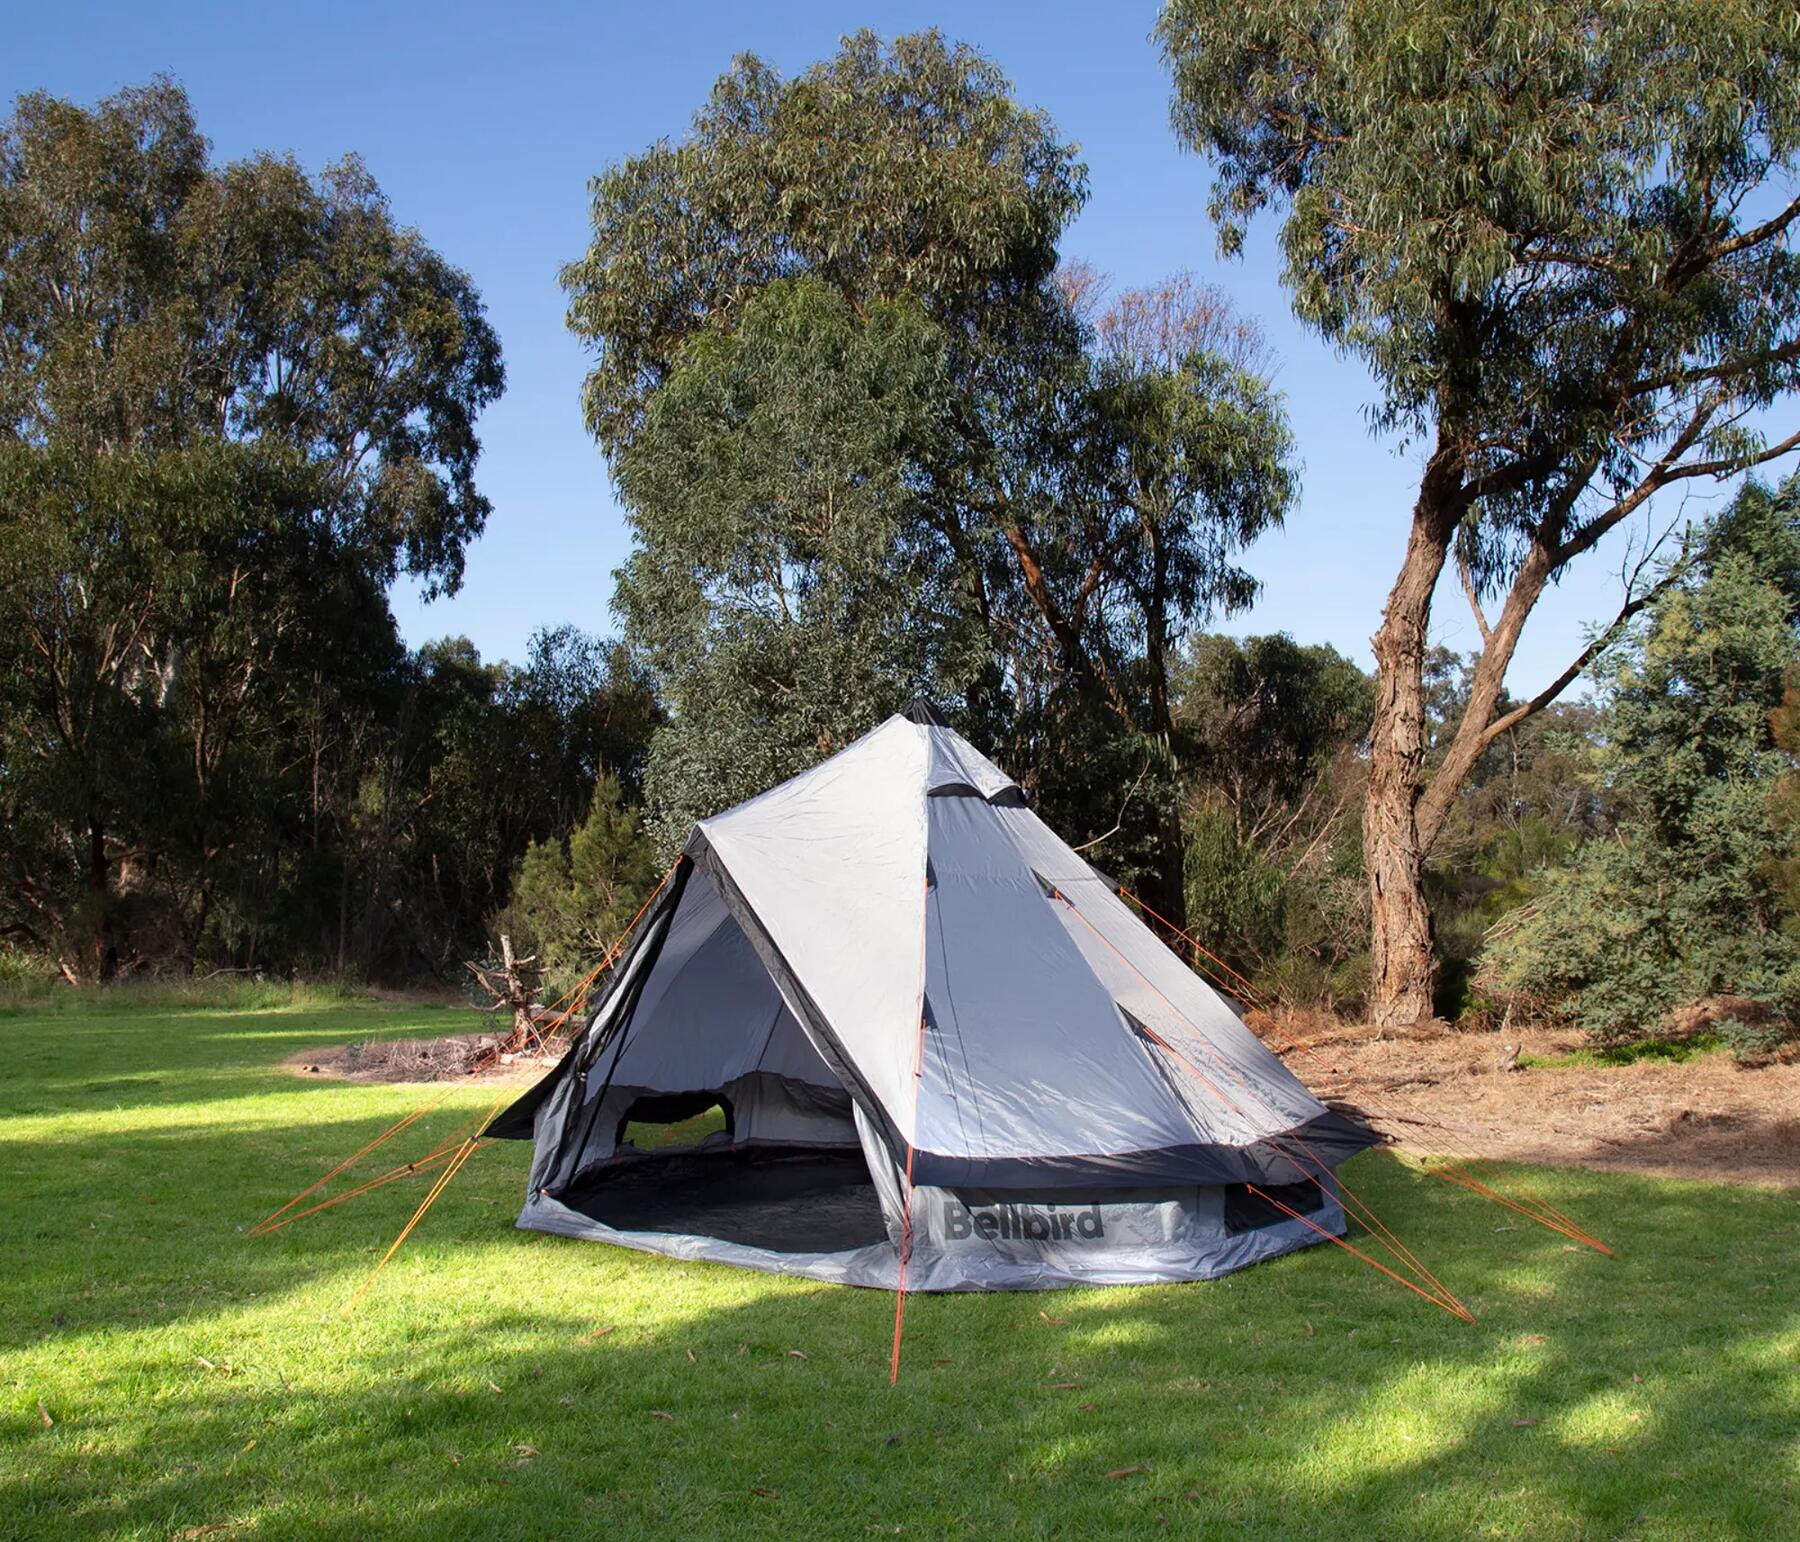 What Kit Do I Need To Go Camping As A Beginner?